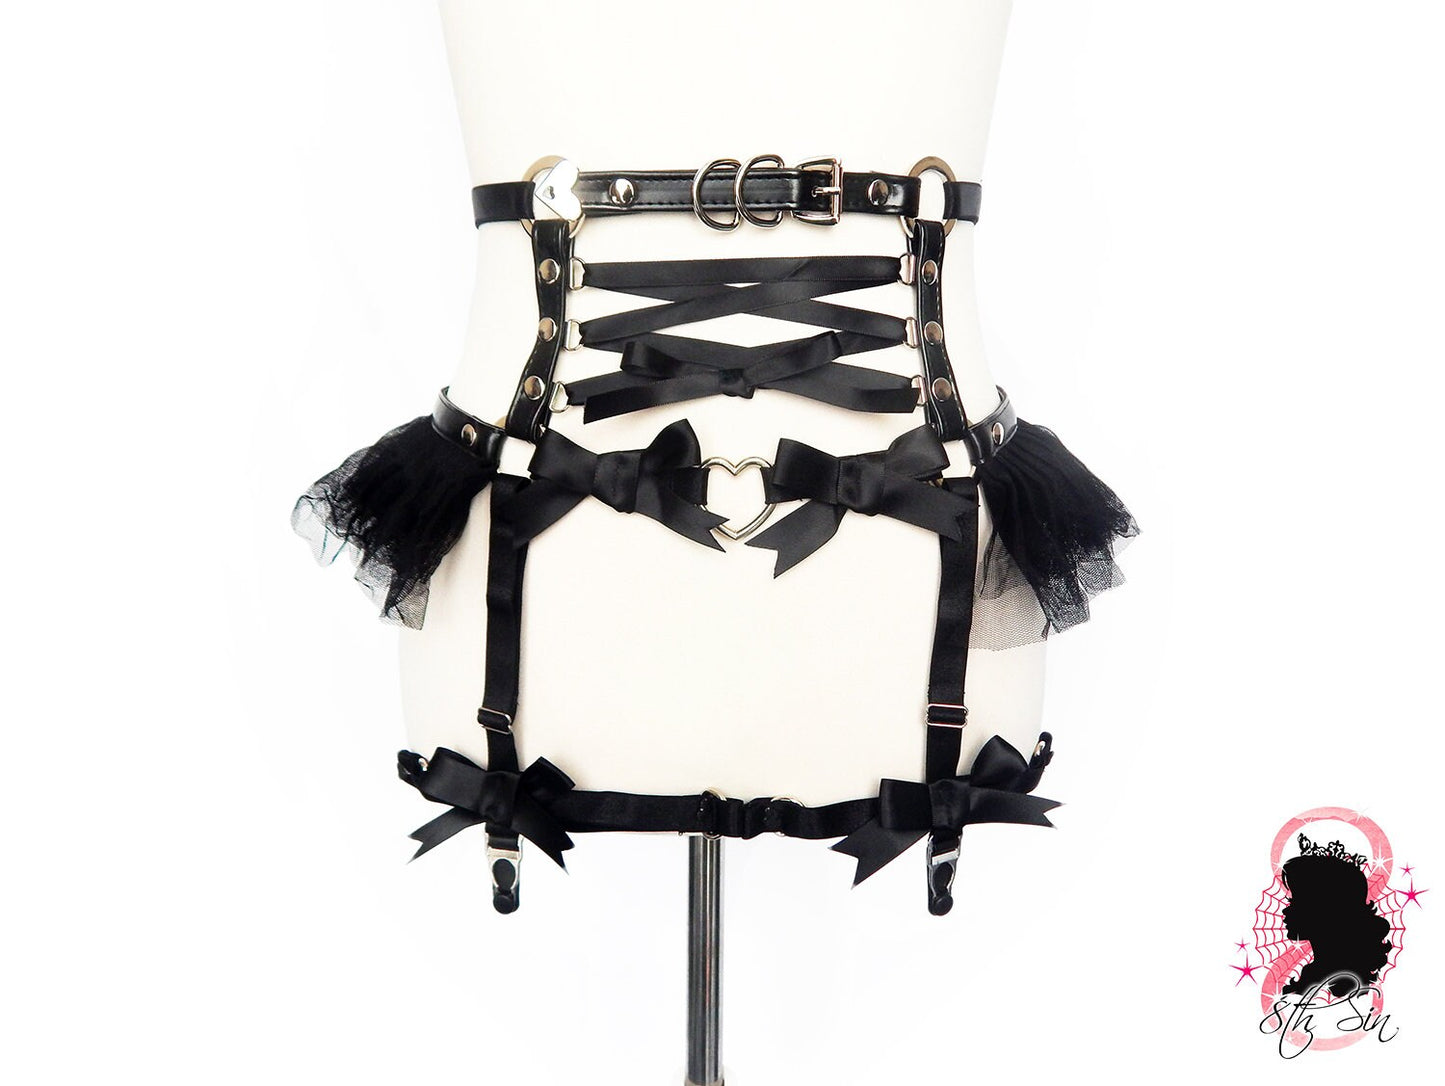 Black Vegan Leather Cage and Corset Harness Set